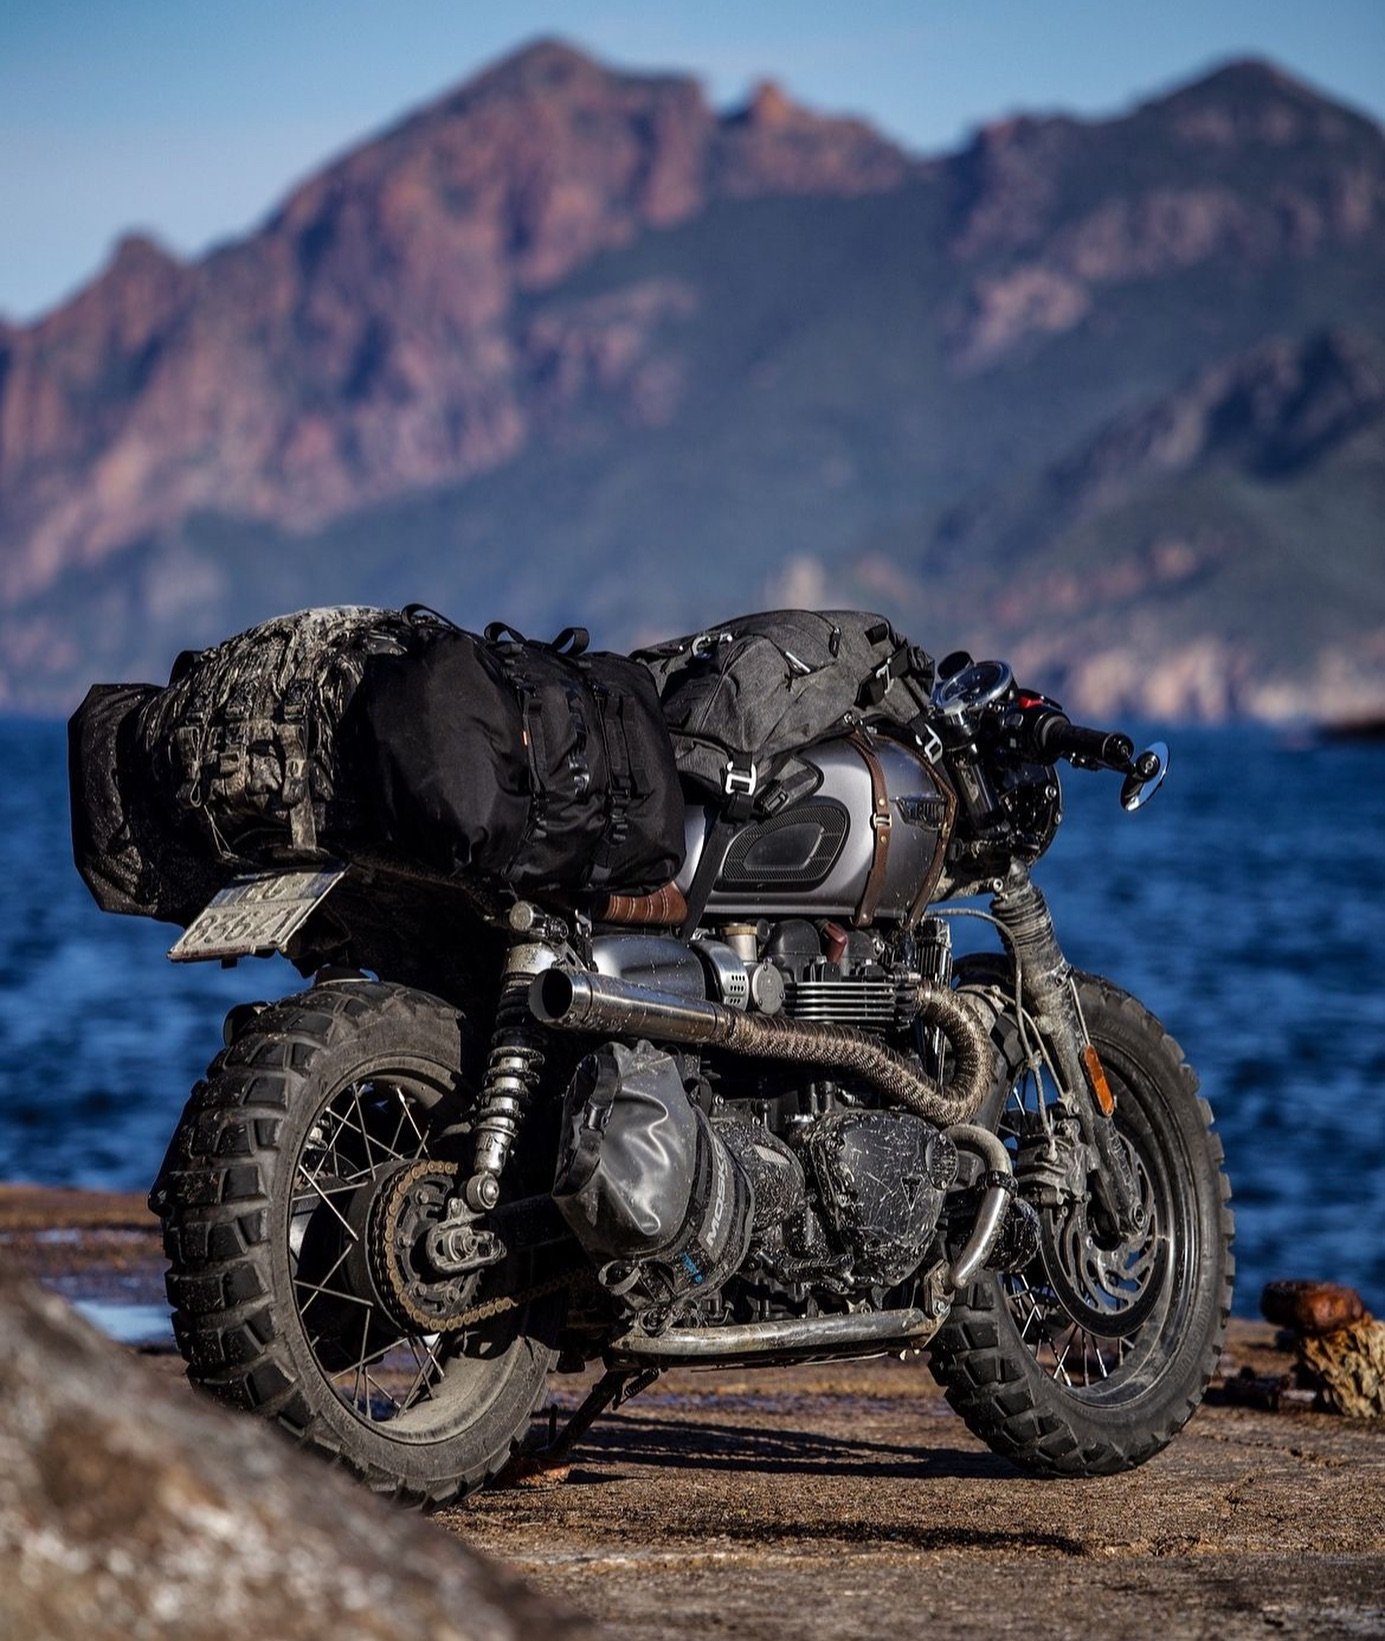 @riccardoraccuia - who took this beautiful photo - says &lsquo;Every bike can be an adventure bike.&rsquo;
What do you think?